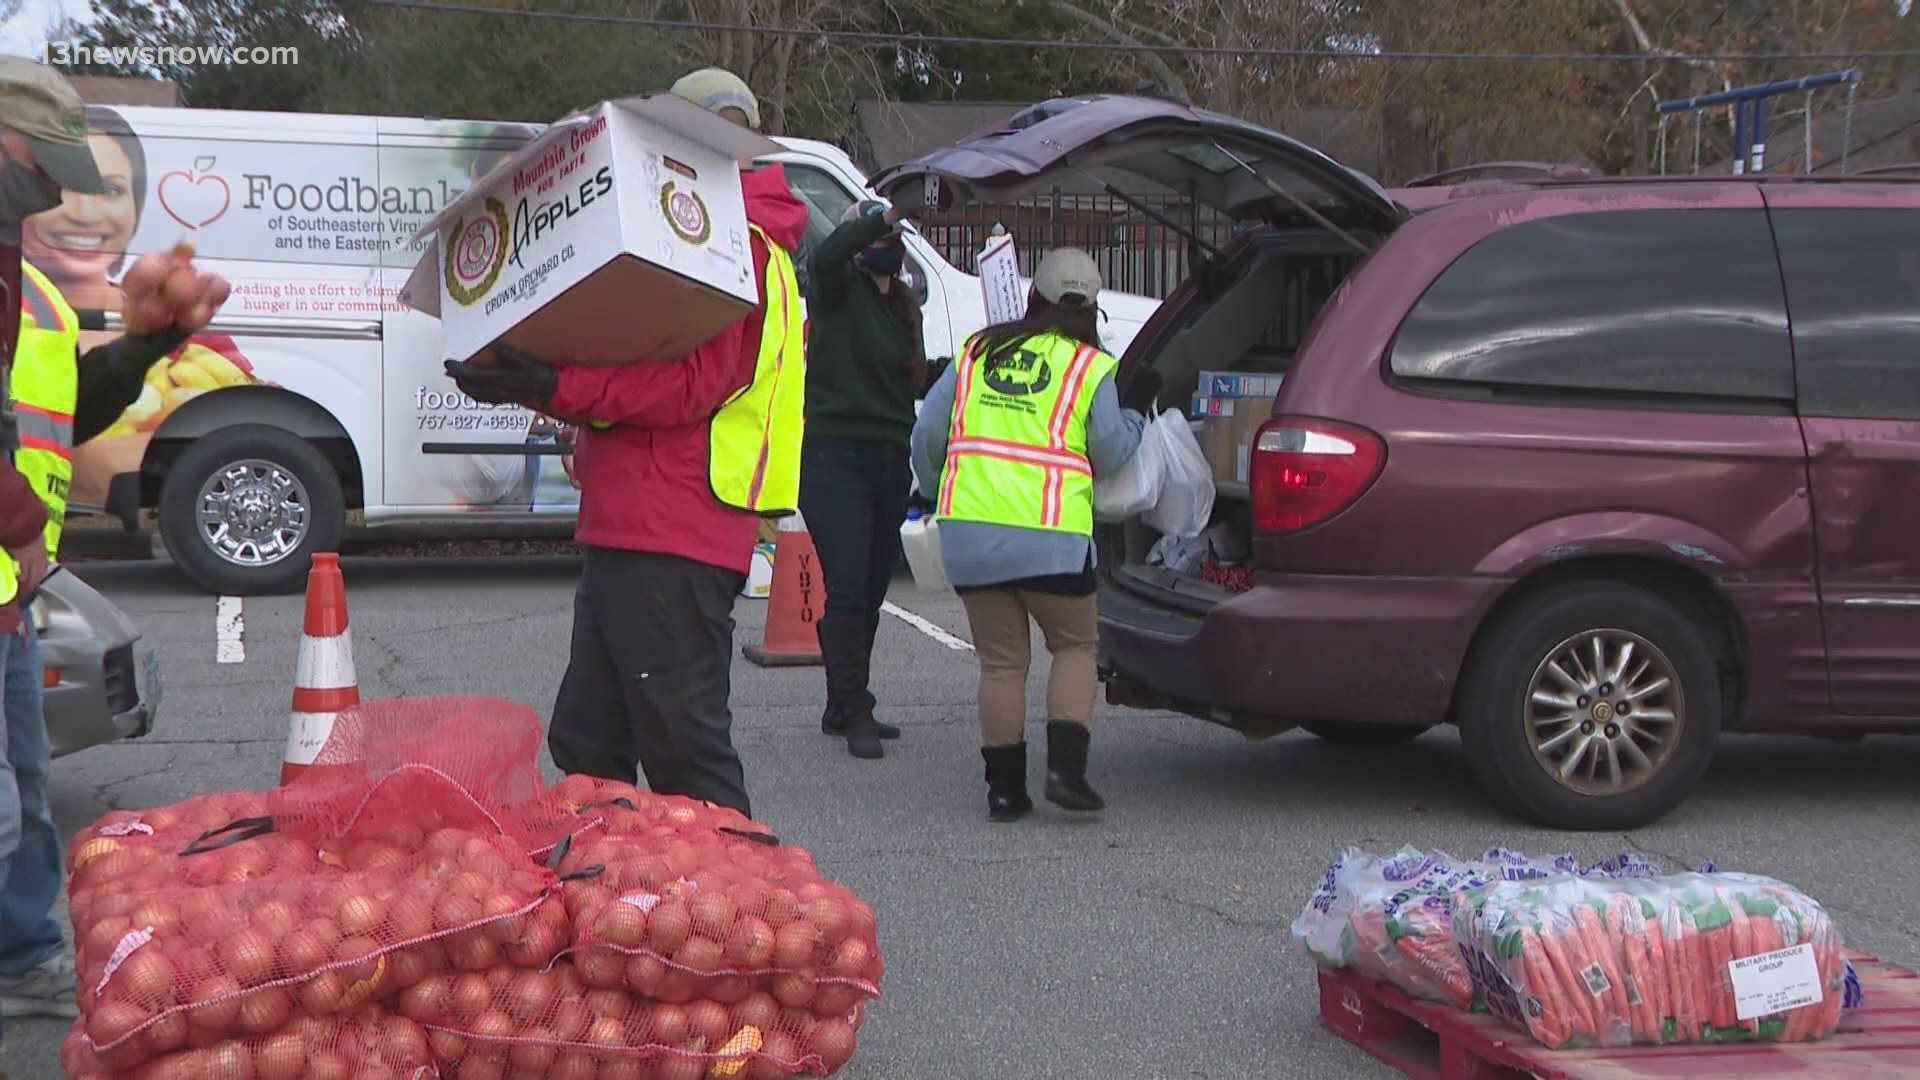 The Food Bank Southeastern Virginia and the Eastern Shore provided food to people in need of assistance on a first-come, first-serve basis.